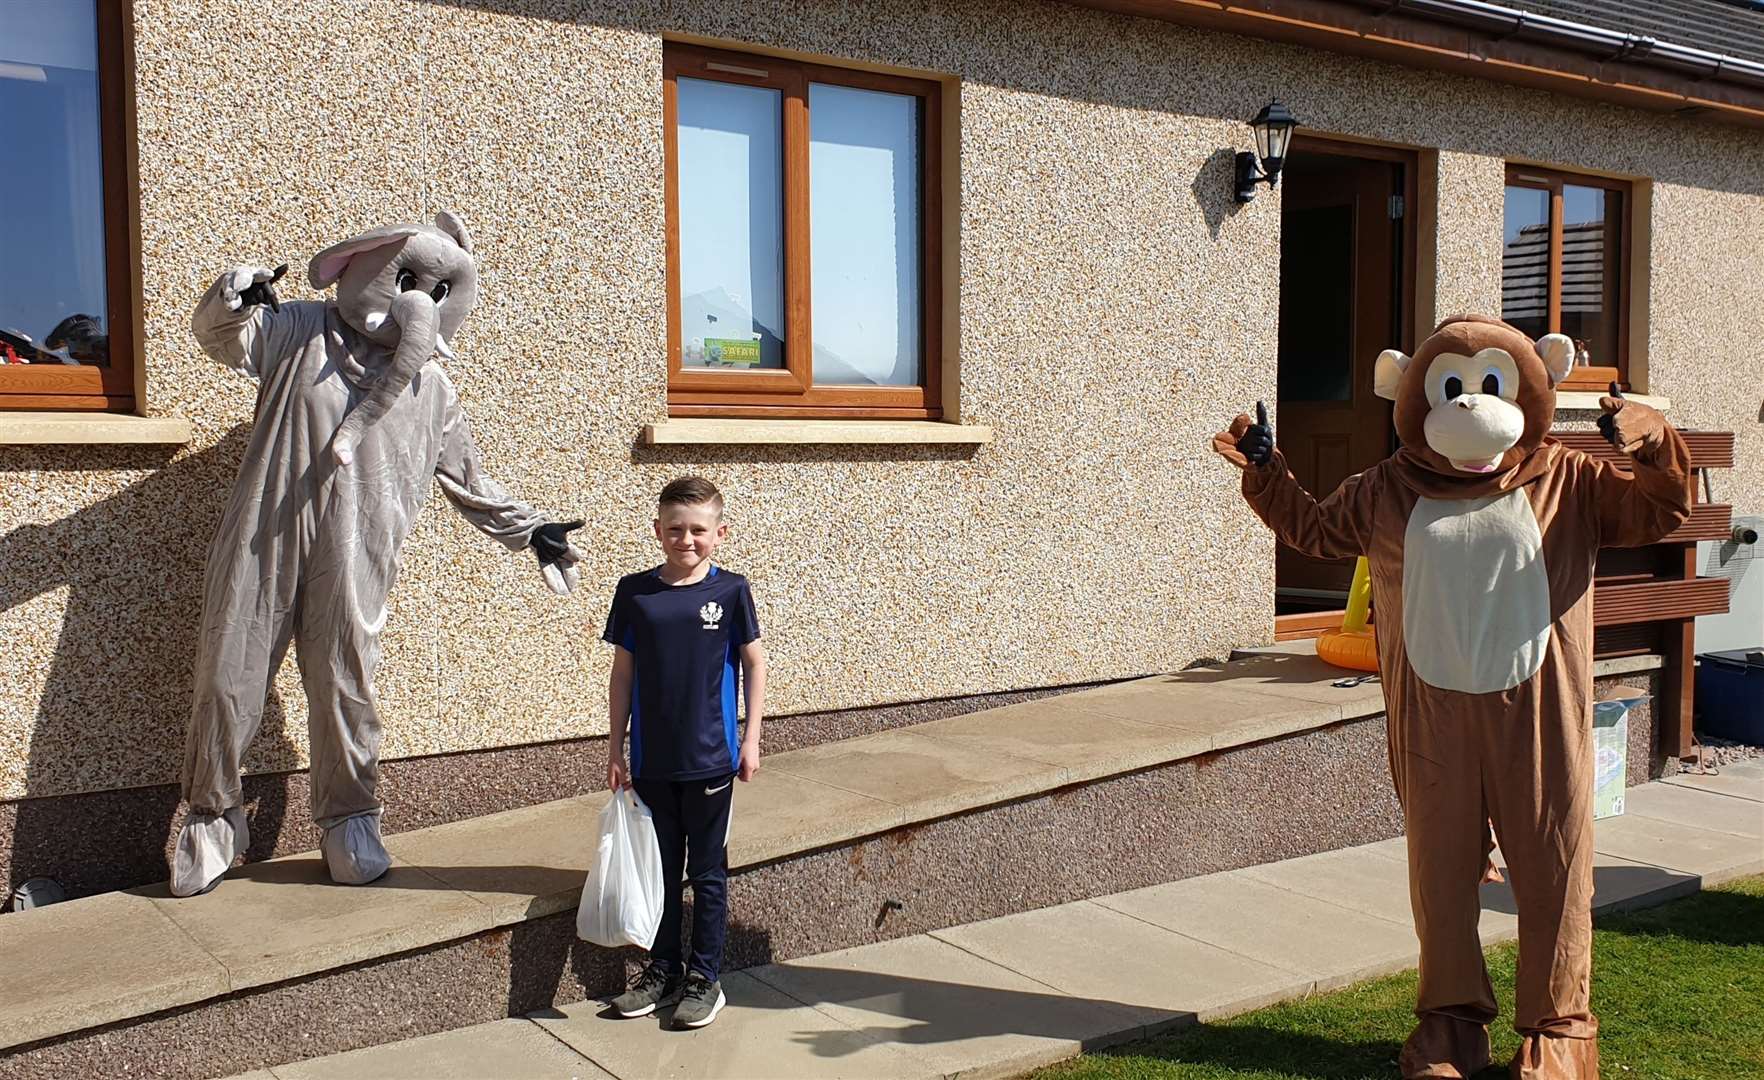 Eight-year-old Connor MacLeod, who benefits from the service due to his mum Shelley's health issues, pictured here with Caithness Klics team members – project manager Wendy Thain, Connor's granny, dressed up as an elephant, and fieldworker Zoe Sutherland in the monkey outfit.